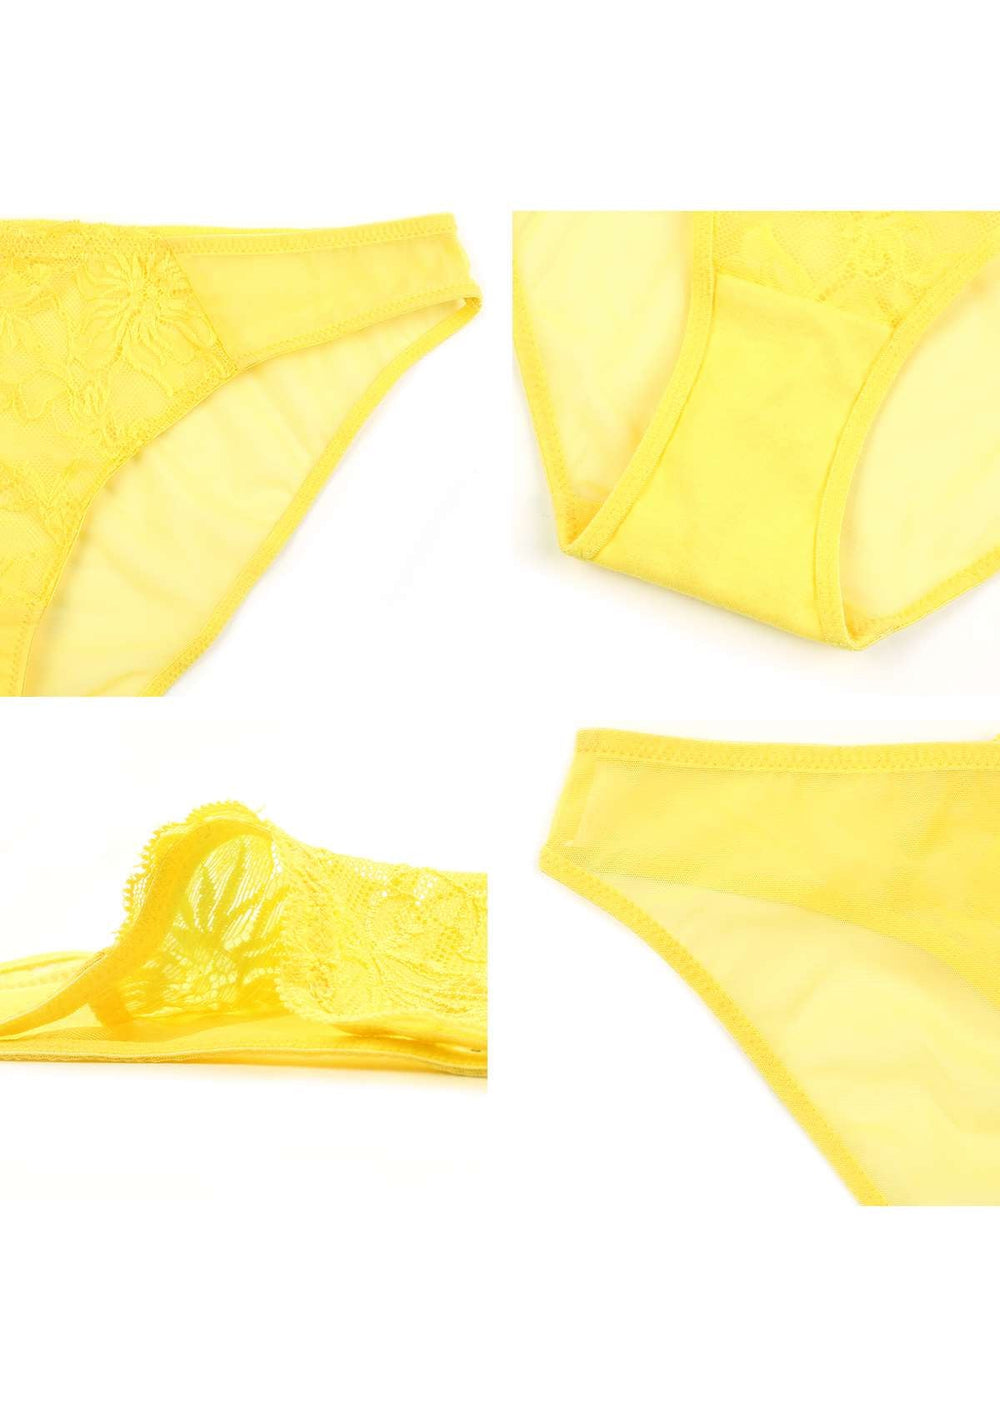 XMMSWDLA Women's Lace Stretch Sexy Thong Bikini Panties Bow Tie Breathable  Fashionable Yellow L Cute Underwear for Women 